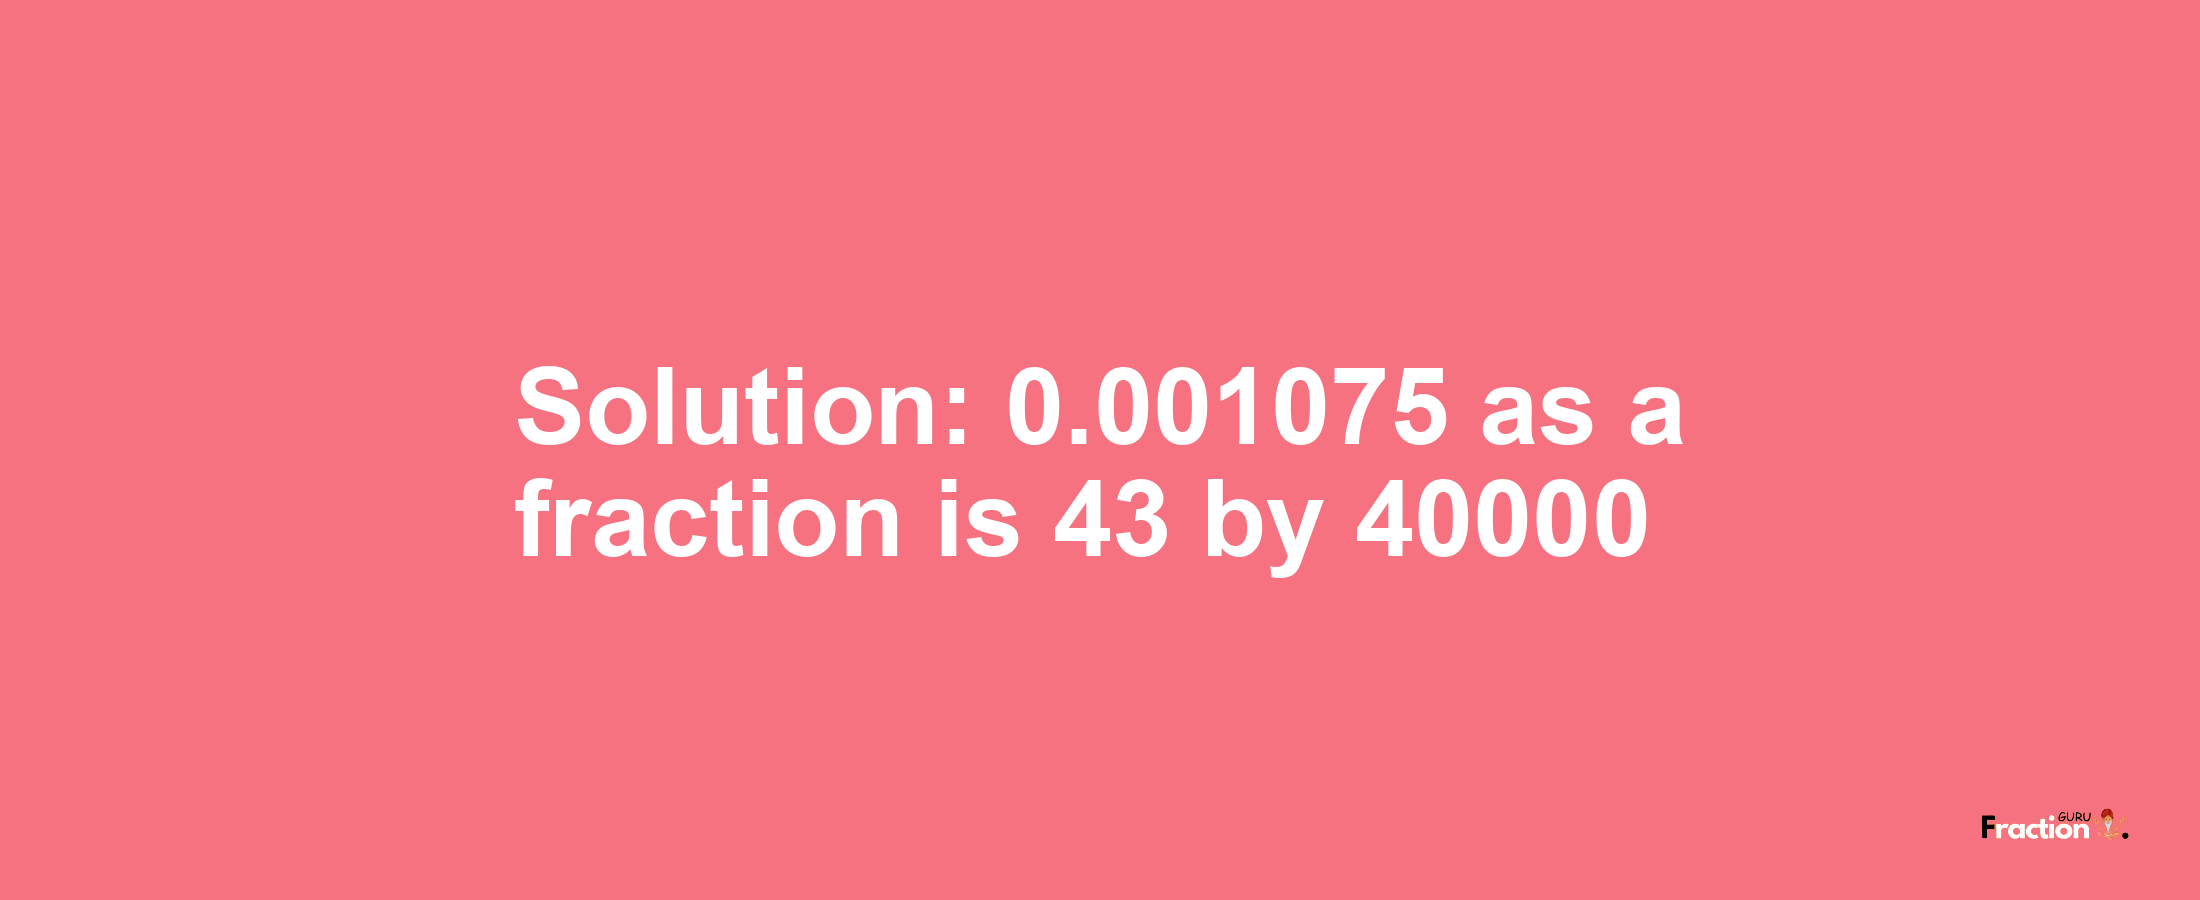 Solution:0.001075 as a fraction is 43/40000